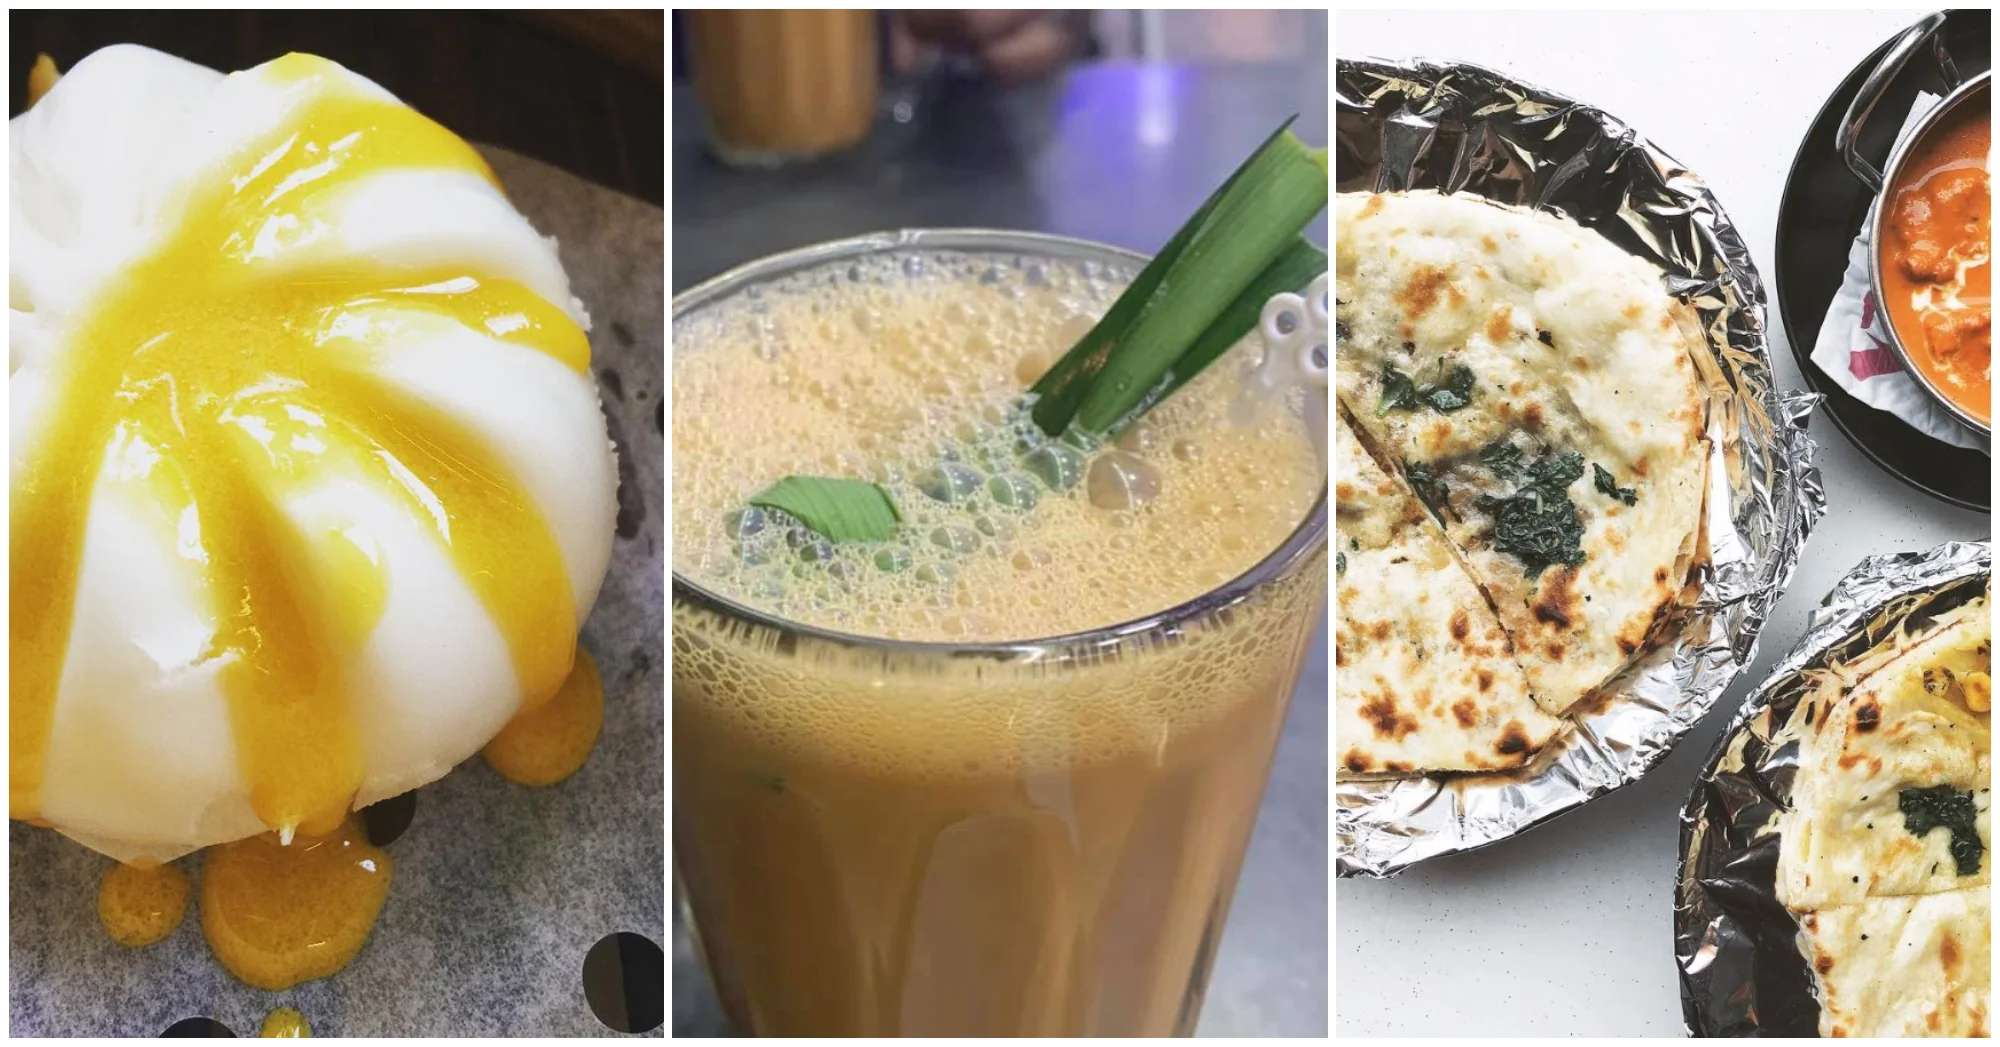 9 Halal Eateries In Singapore That Are Open 24 Hours